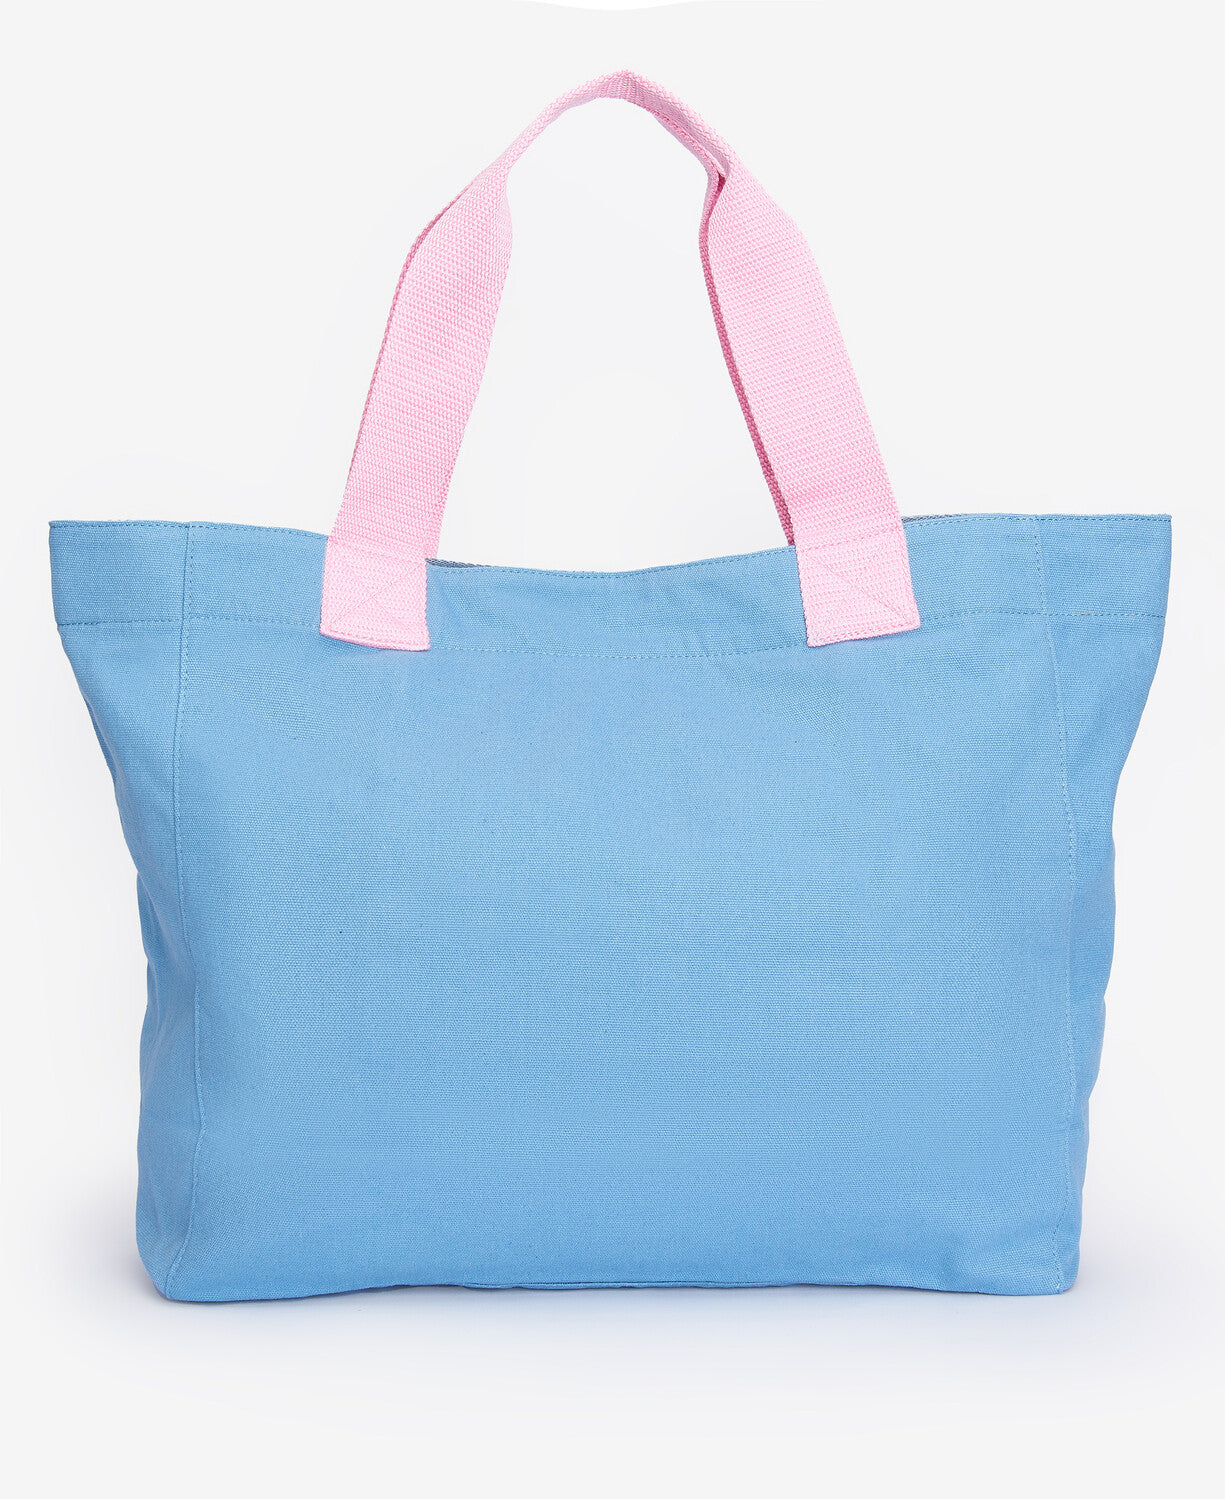 Barbour Logo Holiday Tote Bag - Chambray Blue